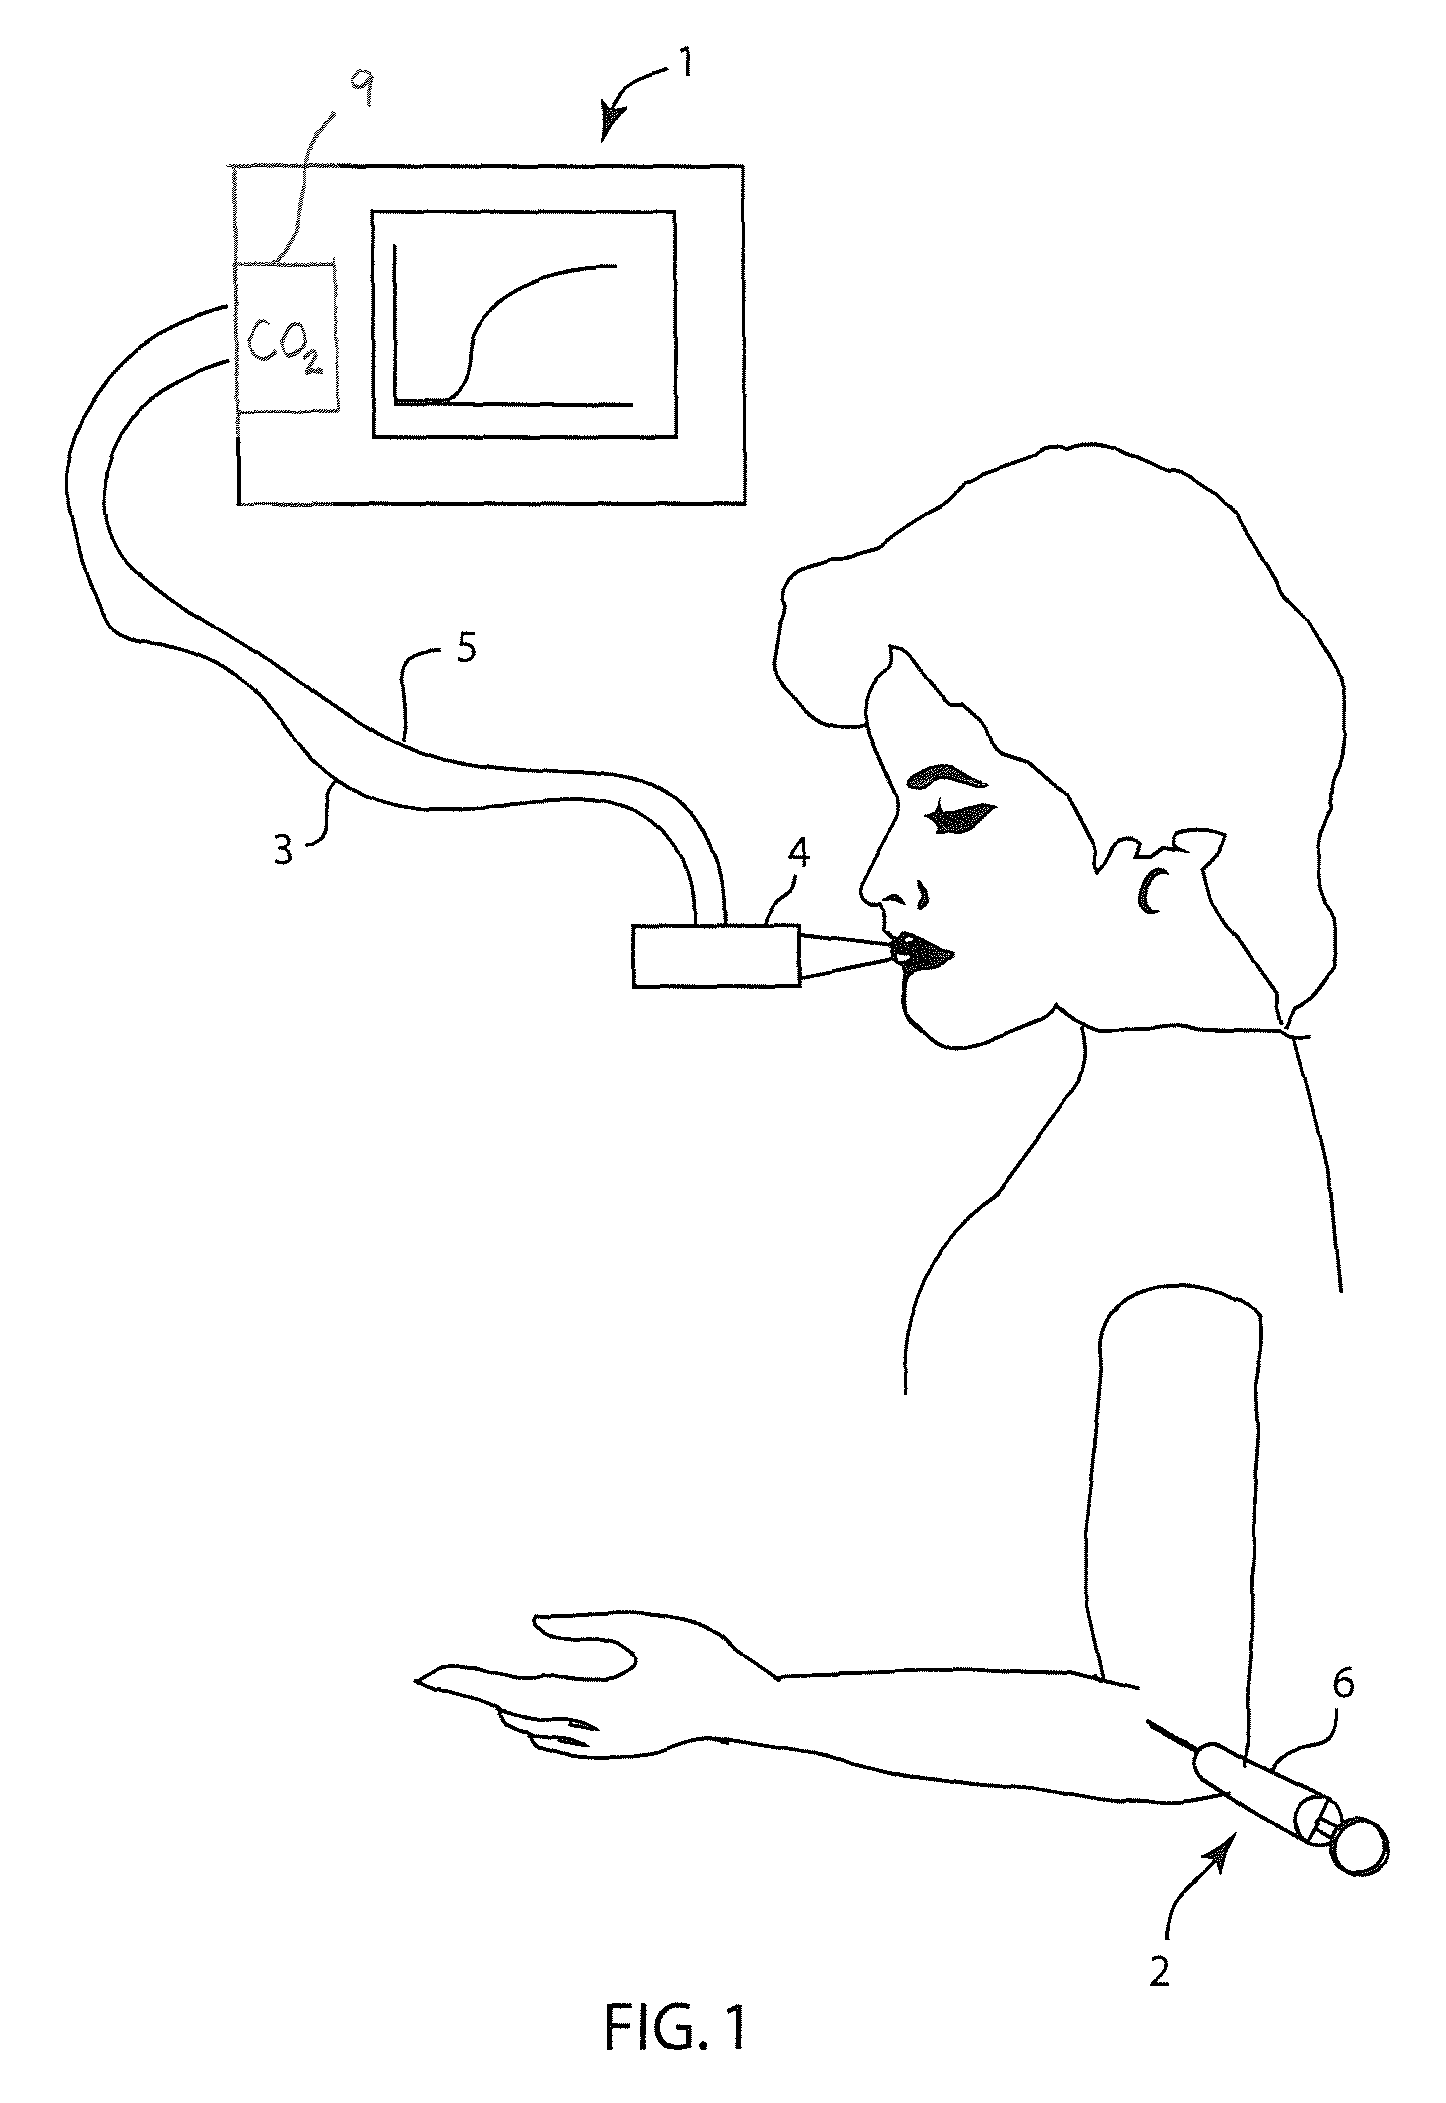 Method and apparatus for indicating the absence of a pulmonary embolism in a patient